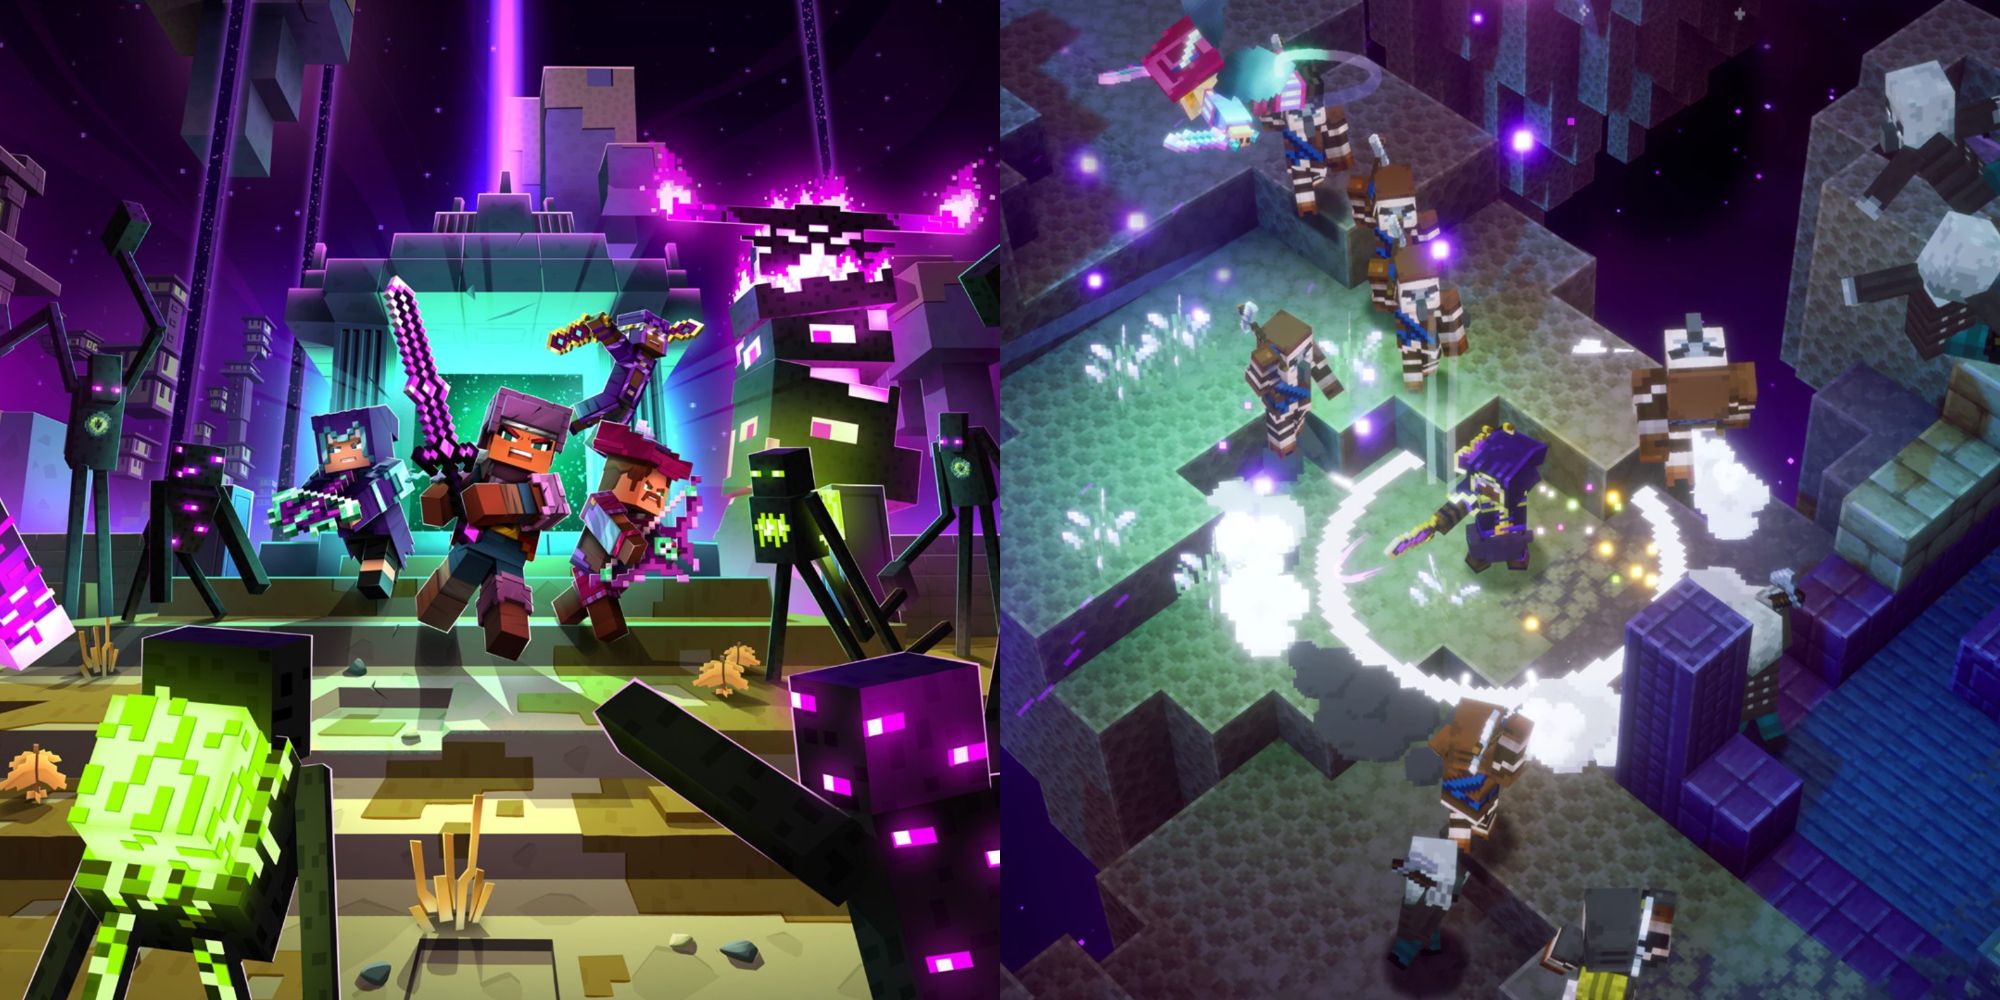 A split image of the cover art for Minecraft Dungeons: The Echoing Void DLC that showcases four players entering the End dimension to fight against endermen, and a photo of a player fighting against a horde of Illagers in the End.